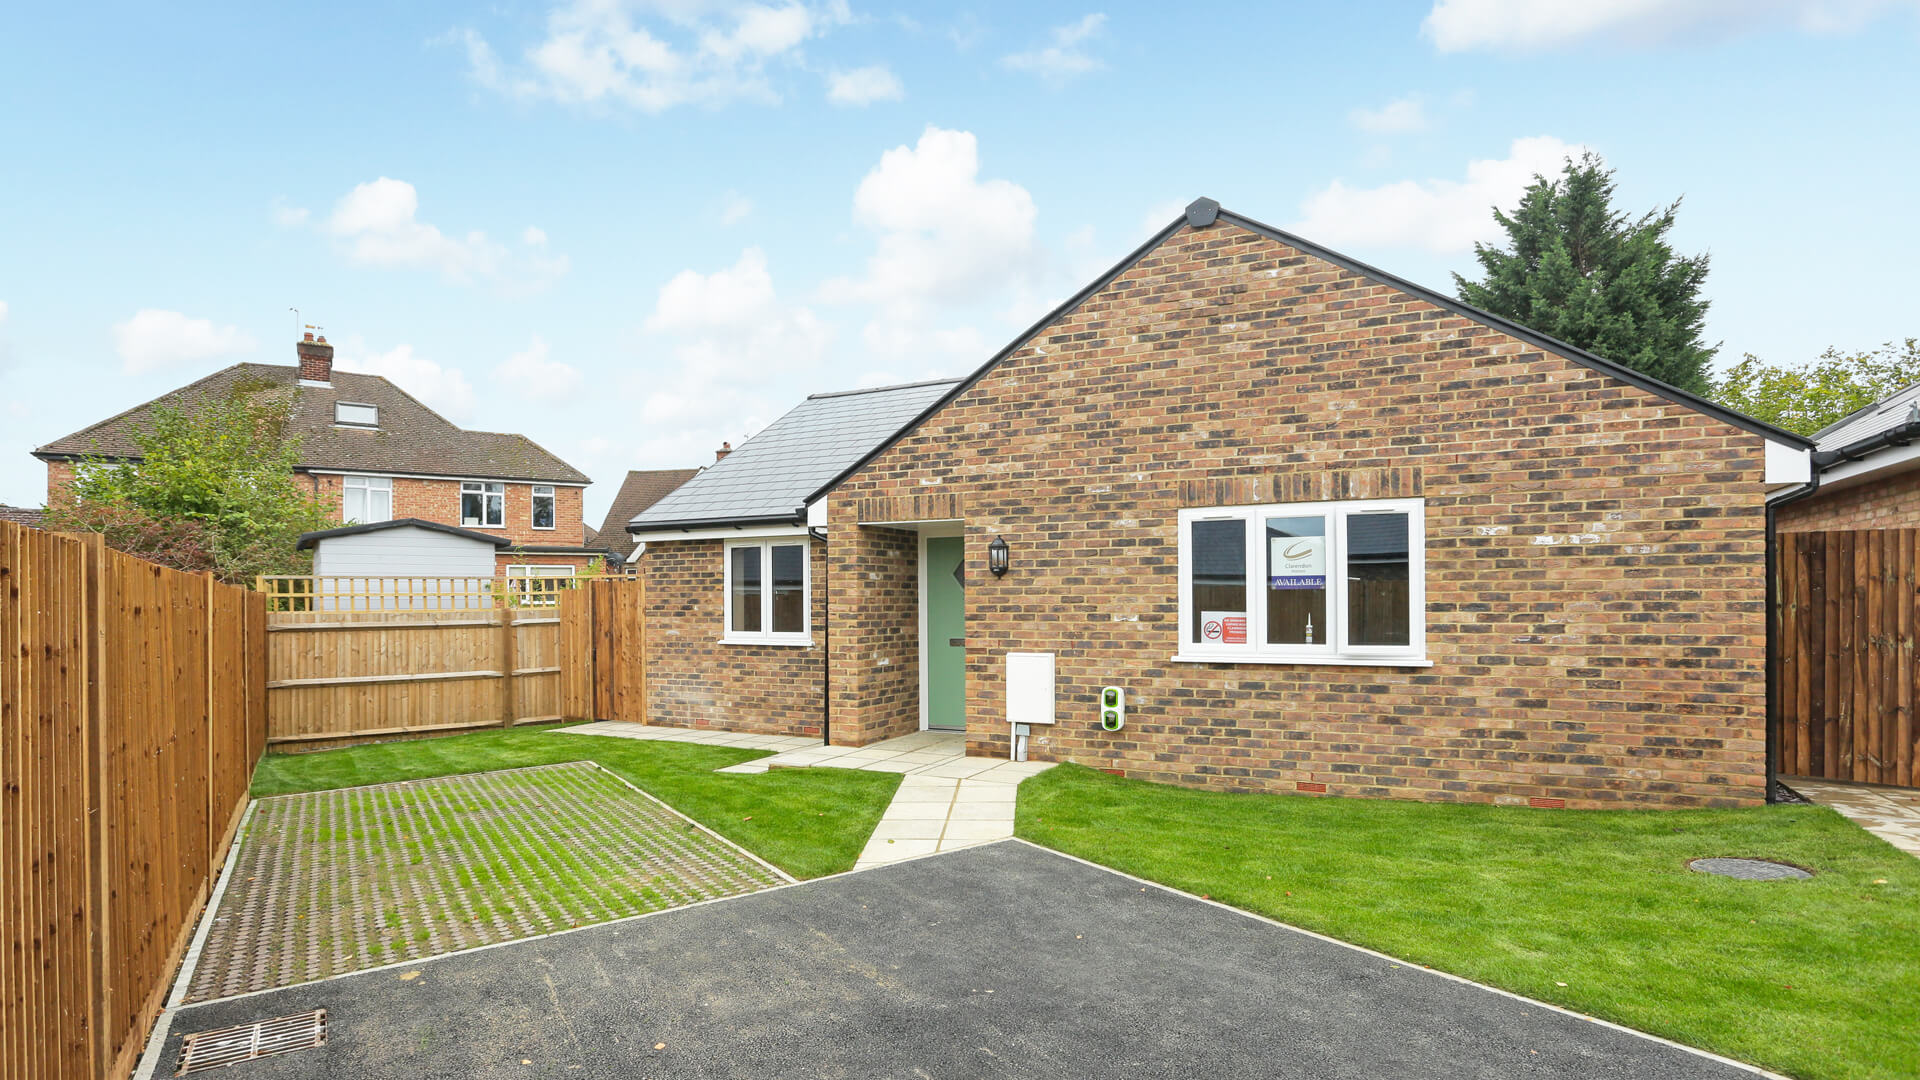 Detached bungalow with drive at Mulberry place.